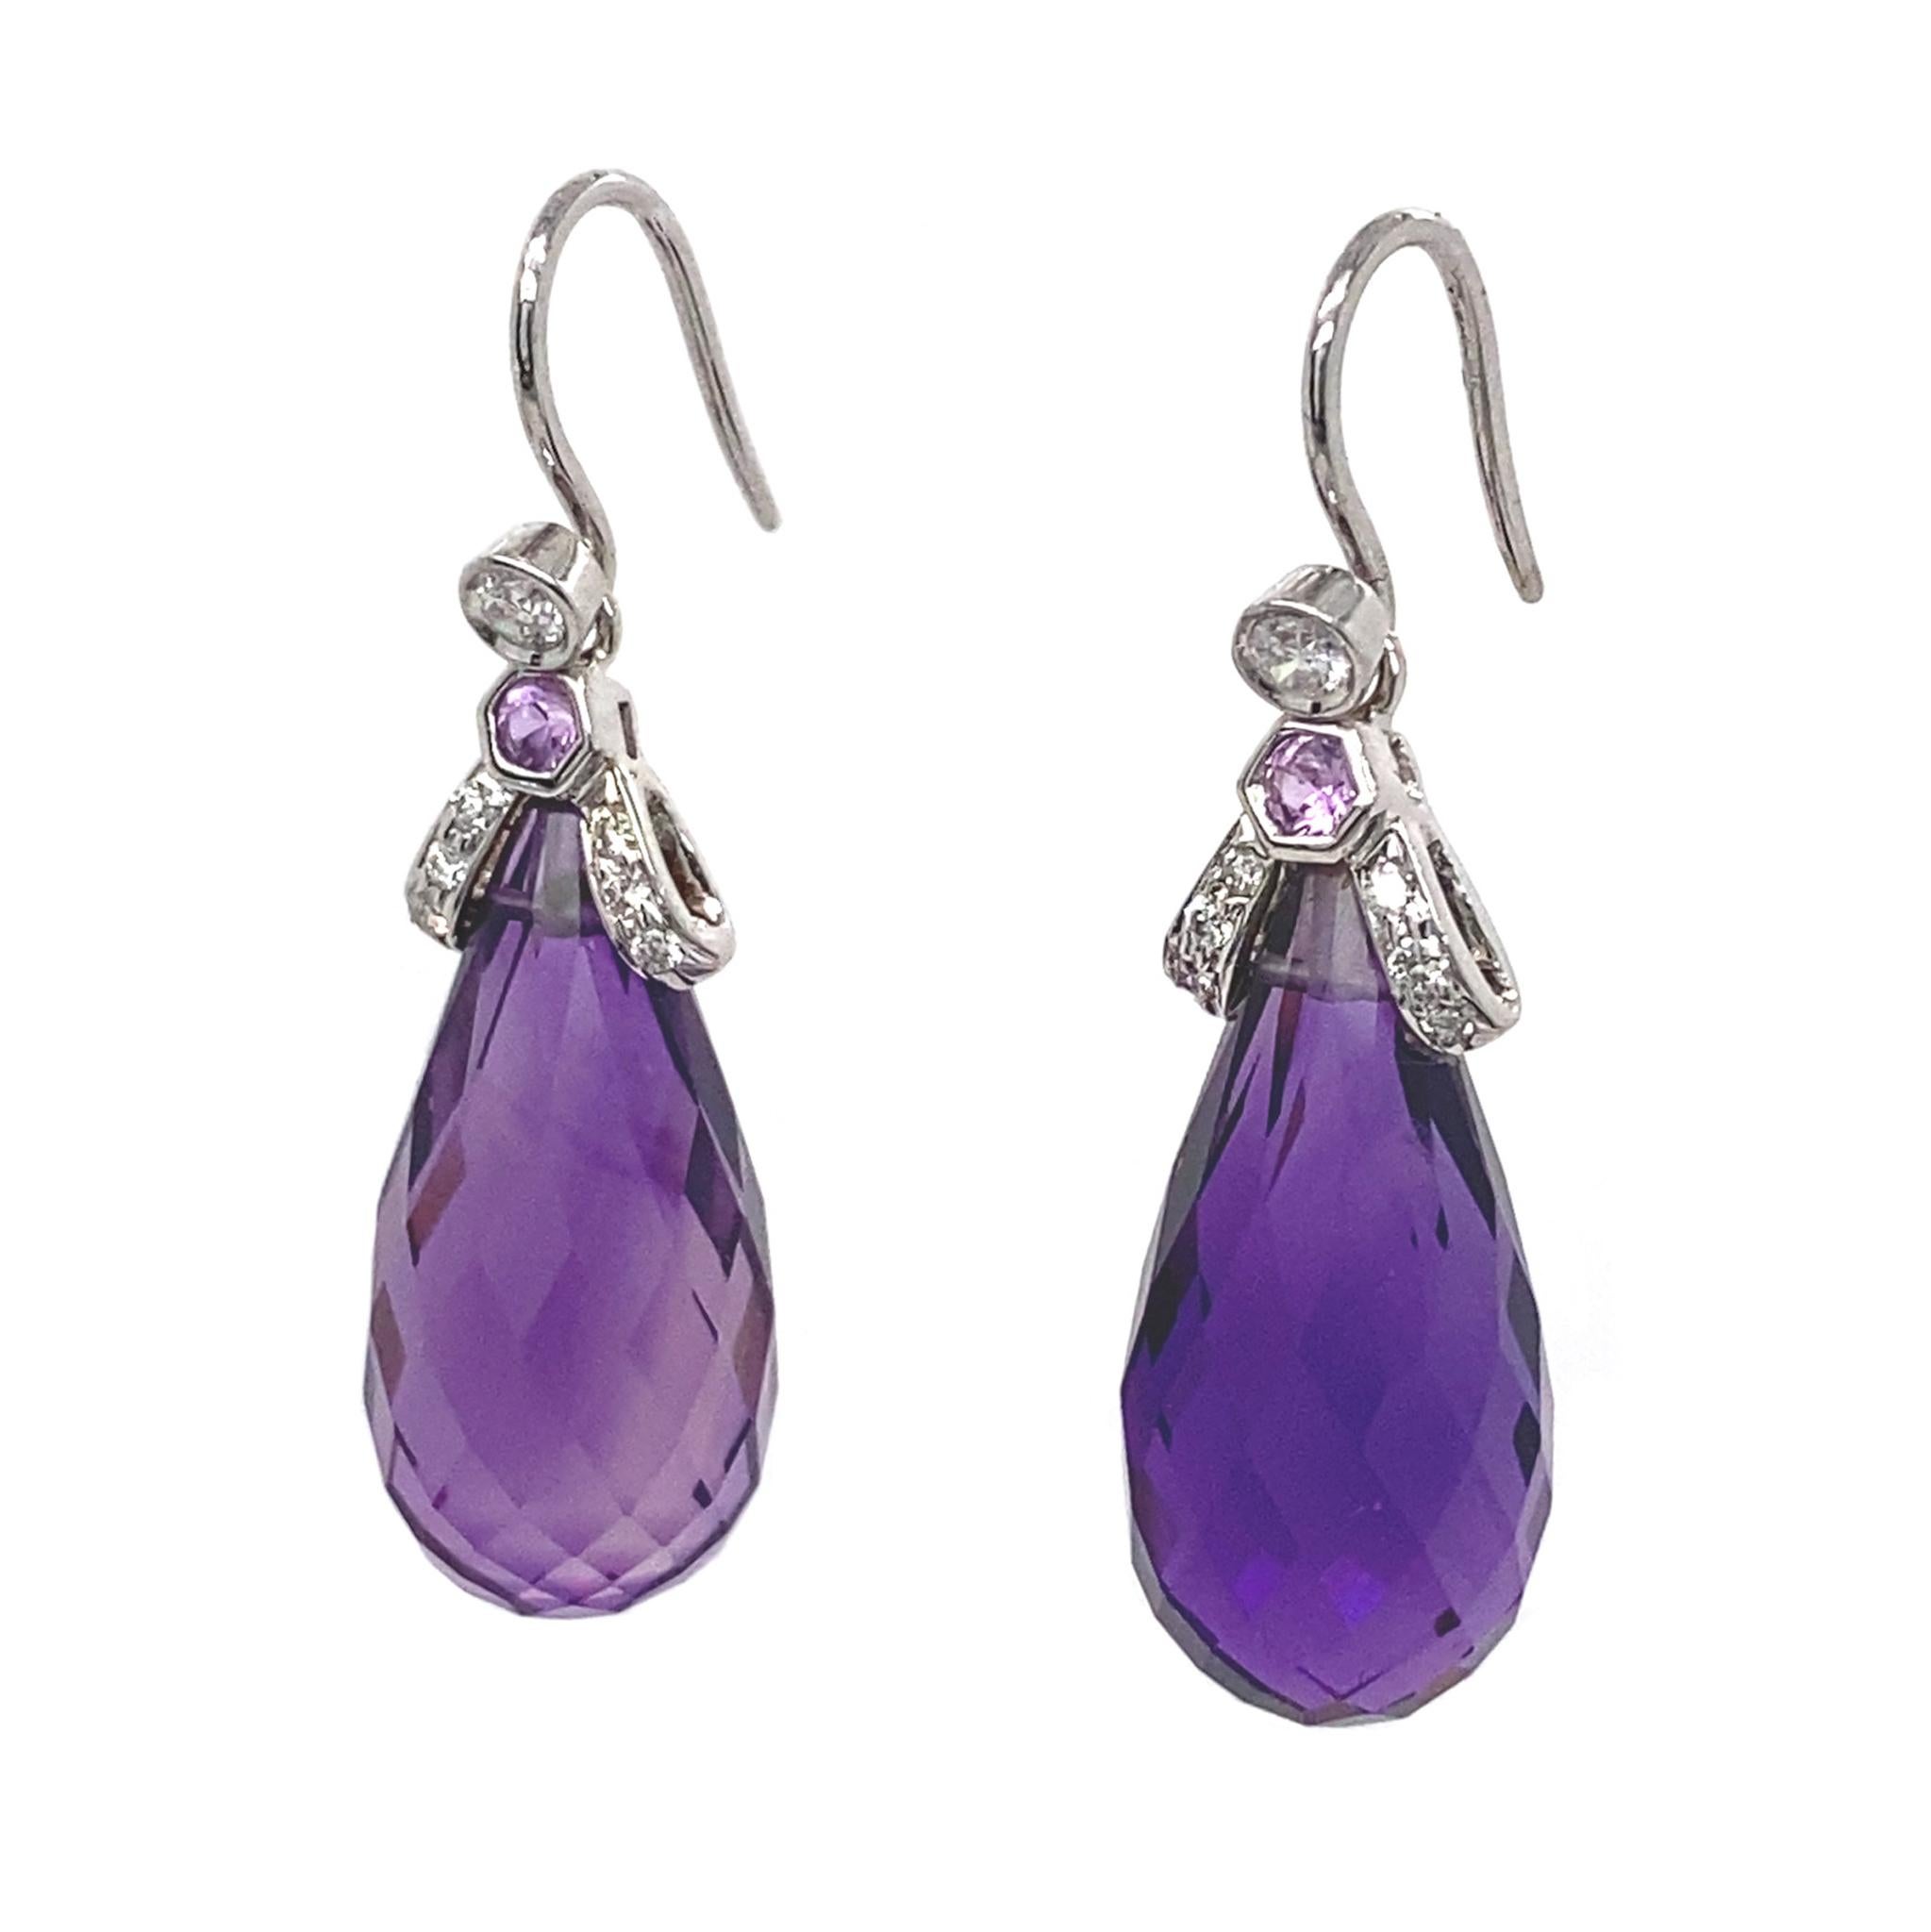 A pair of rich violet Amethyst drop earrings that carry the shape and symbolism of the Old World fruit, the Aubergine. In Chinese culture, it even represents good health, long life and a promising career growth. The drops of 2 Amethysts (totalling